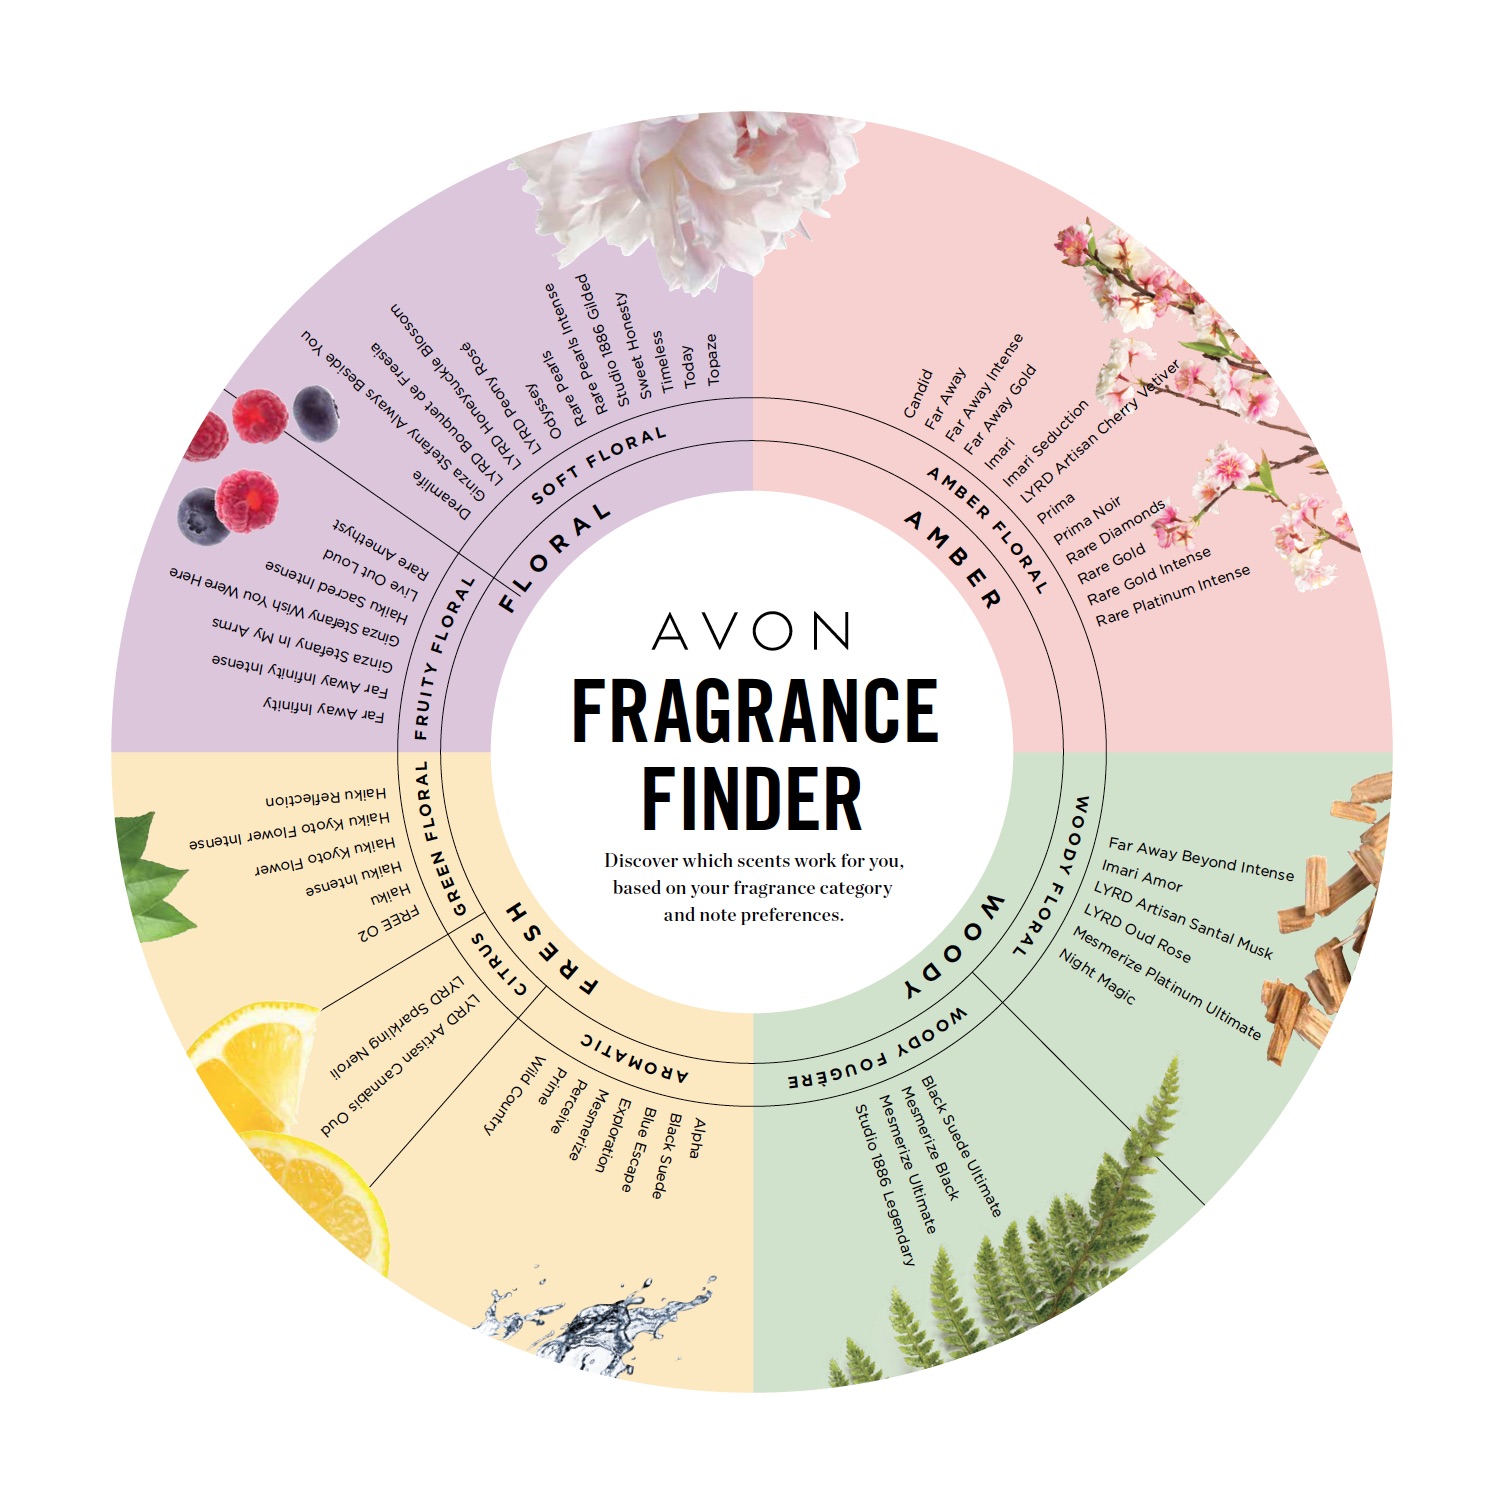 FIND YOUR NEW SIGNATURE FRAGRANCE - Nancy, the Avon Lady of NJ